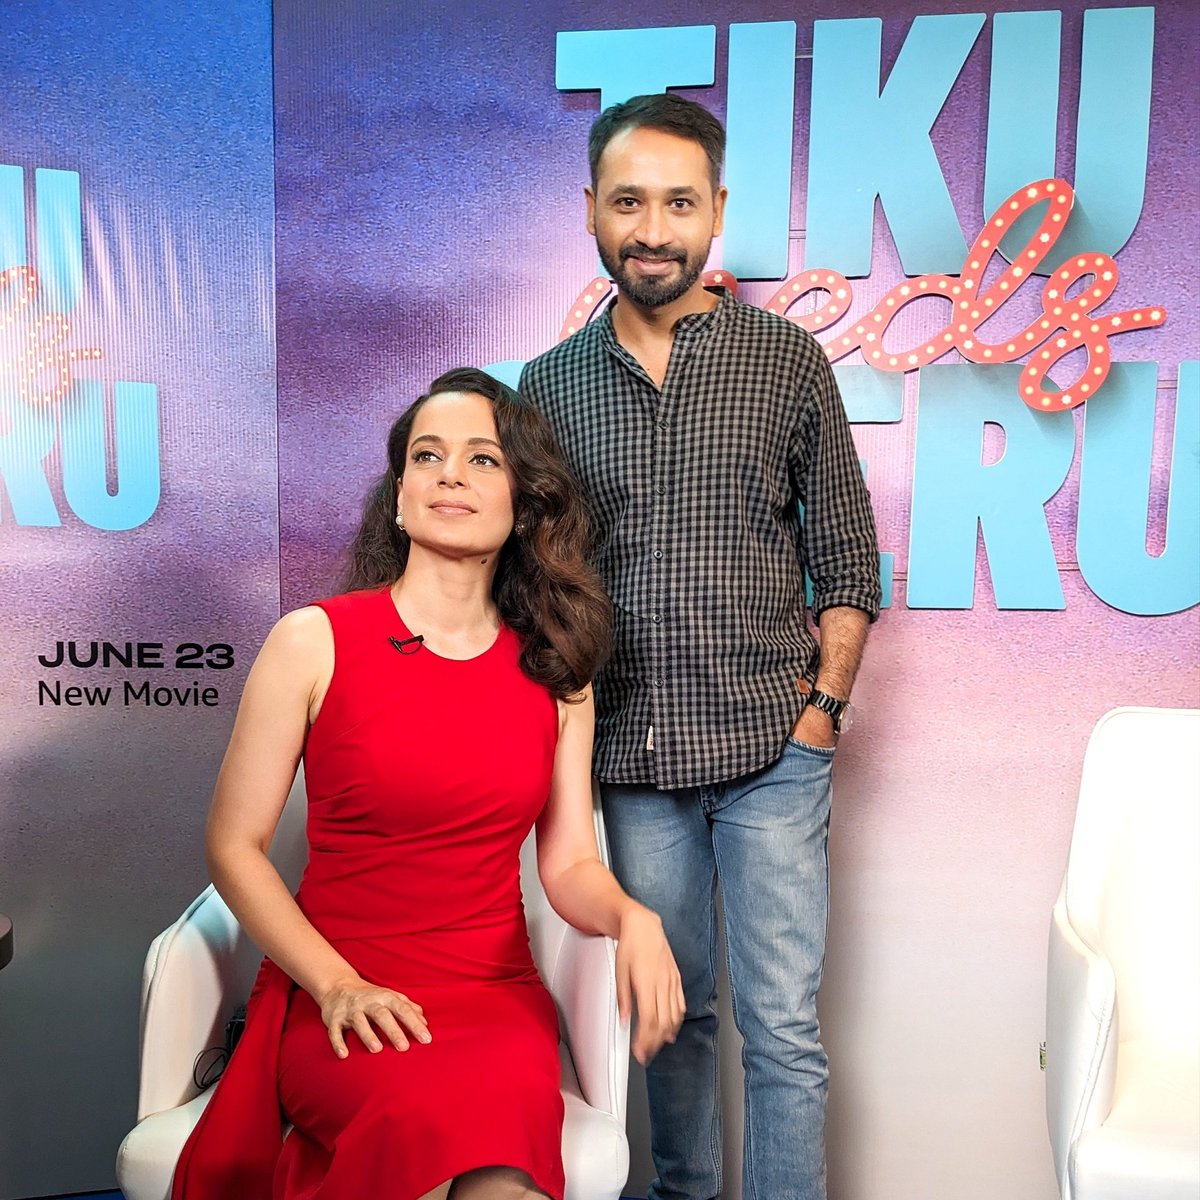 Just had an amazing interaction with #KanganaRanaut about her upcoming film #TikuWedsSheru! Exciting to see her stepping into the producer's role. Can't wait for the premiere on Prime Video on June 23! 🎬